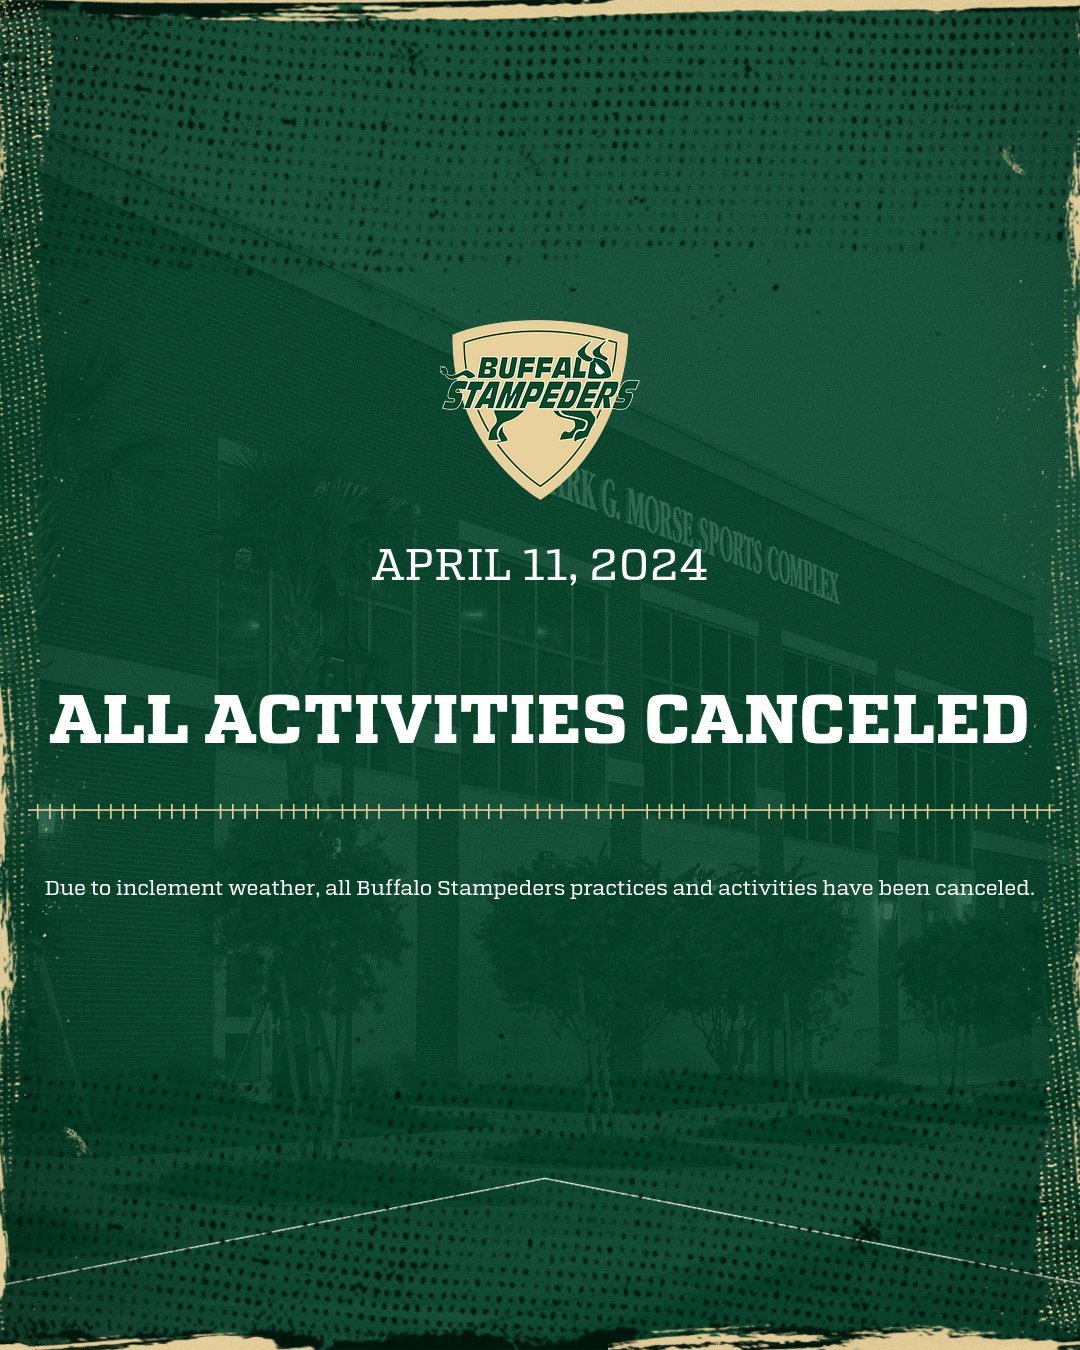 Severe weather update: ALL ACTIVITIES CANCELLED for April 11, 2024. This applies only to Buffalo Stampeders activities at this time.